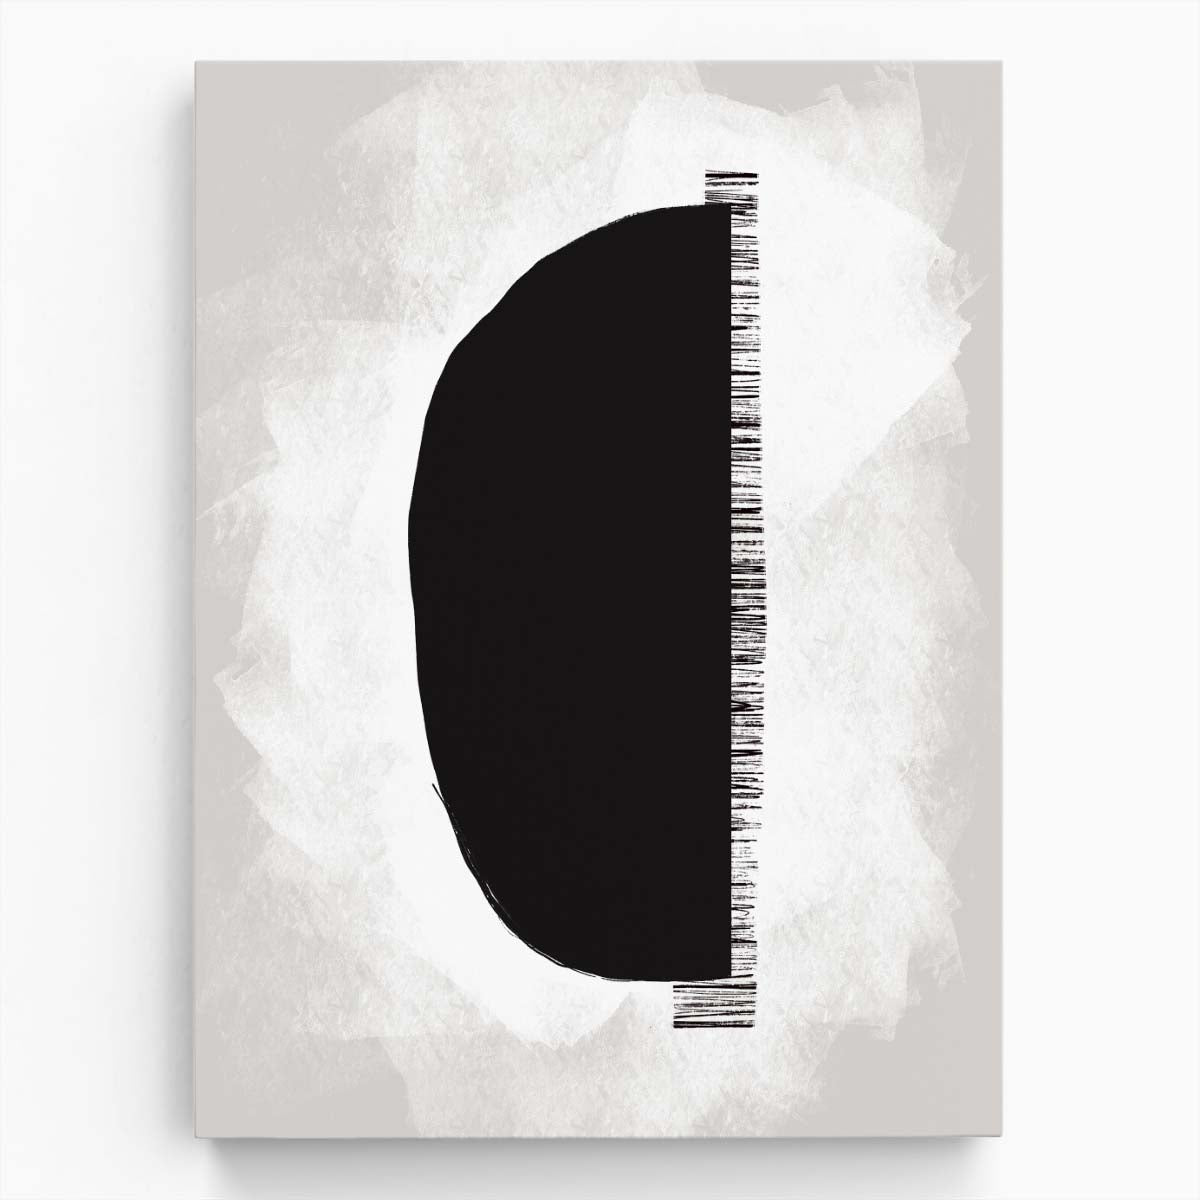 Abstract Illustration Artwork in Gray, White, Black by Uplusmestudio by Luxuriance Designs, made in USA